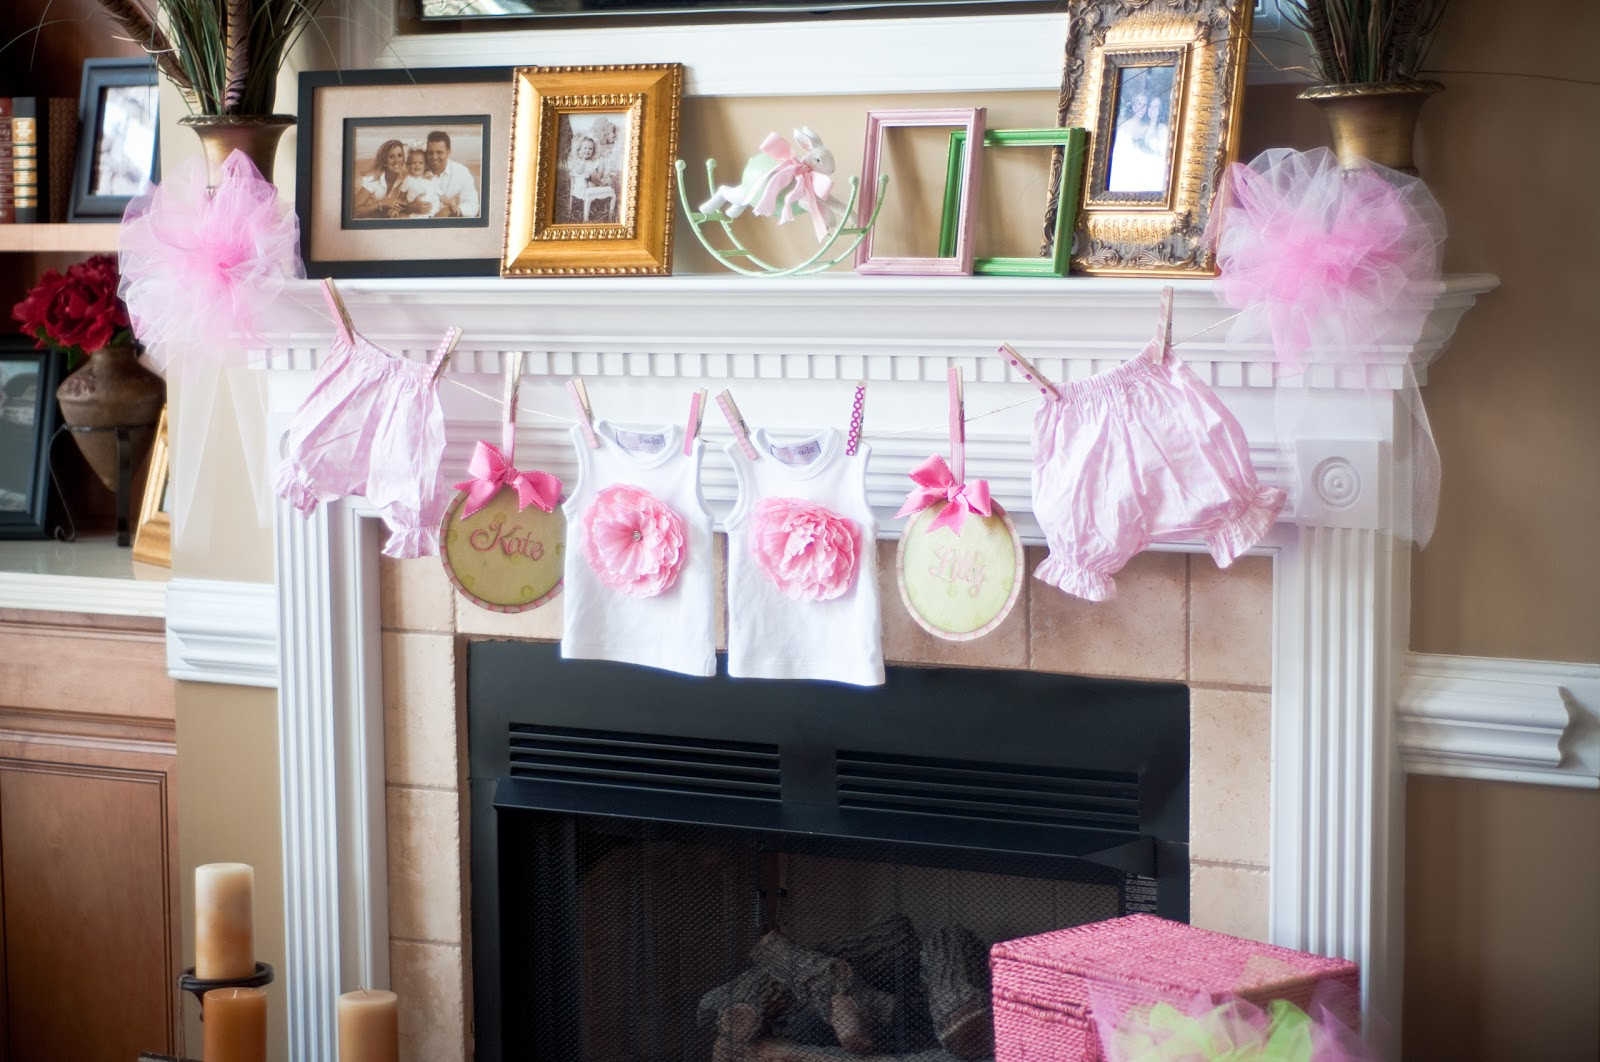 Decor Ideas For Baby Shower
 paws & re thread baby shower decorating ideas clothes